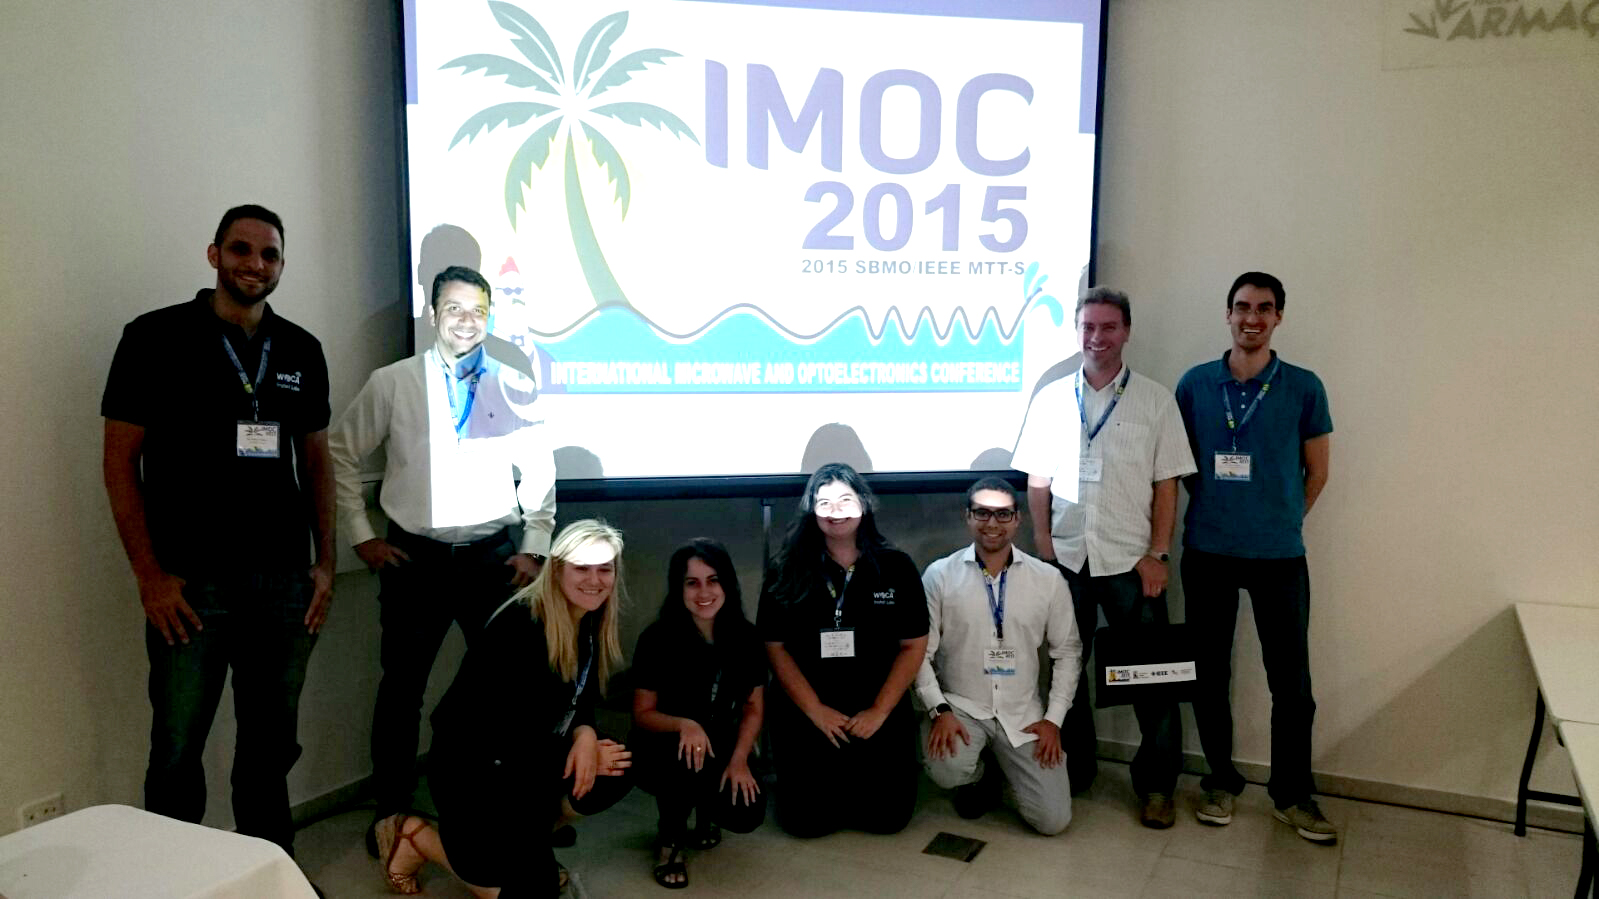 inatel-imoc-out_2015